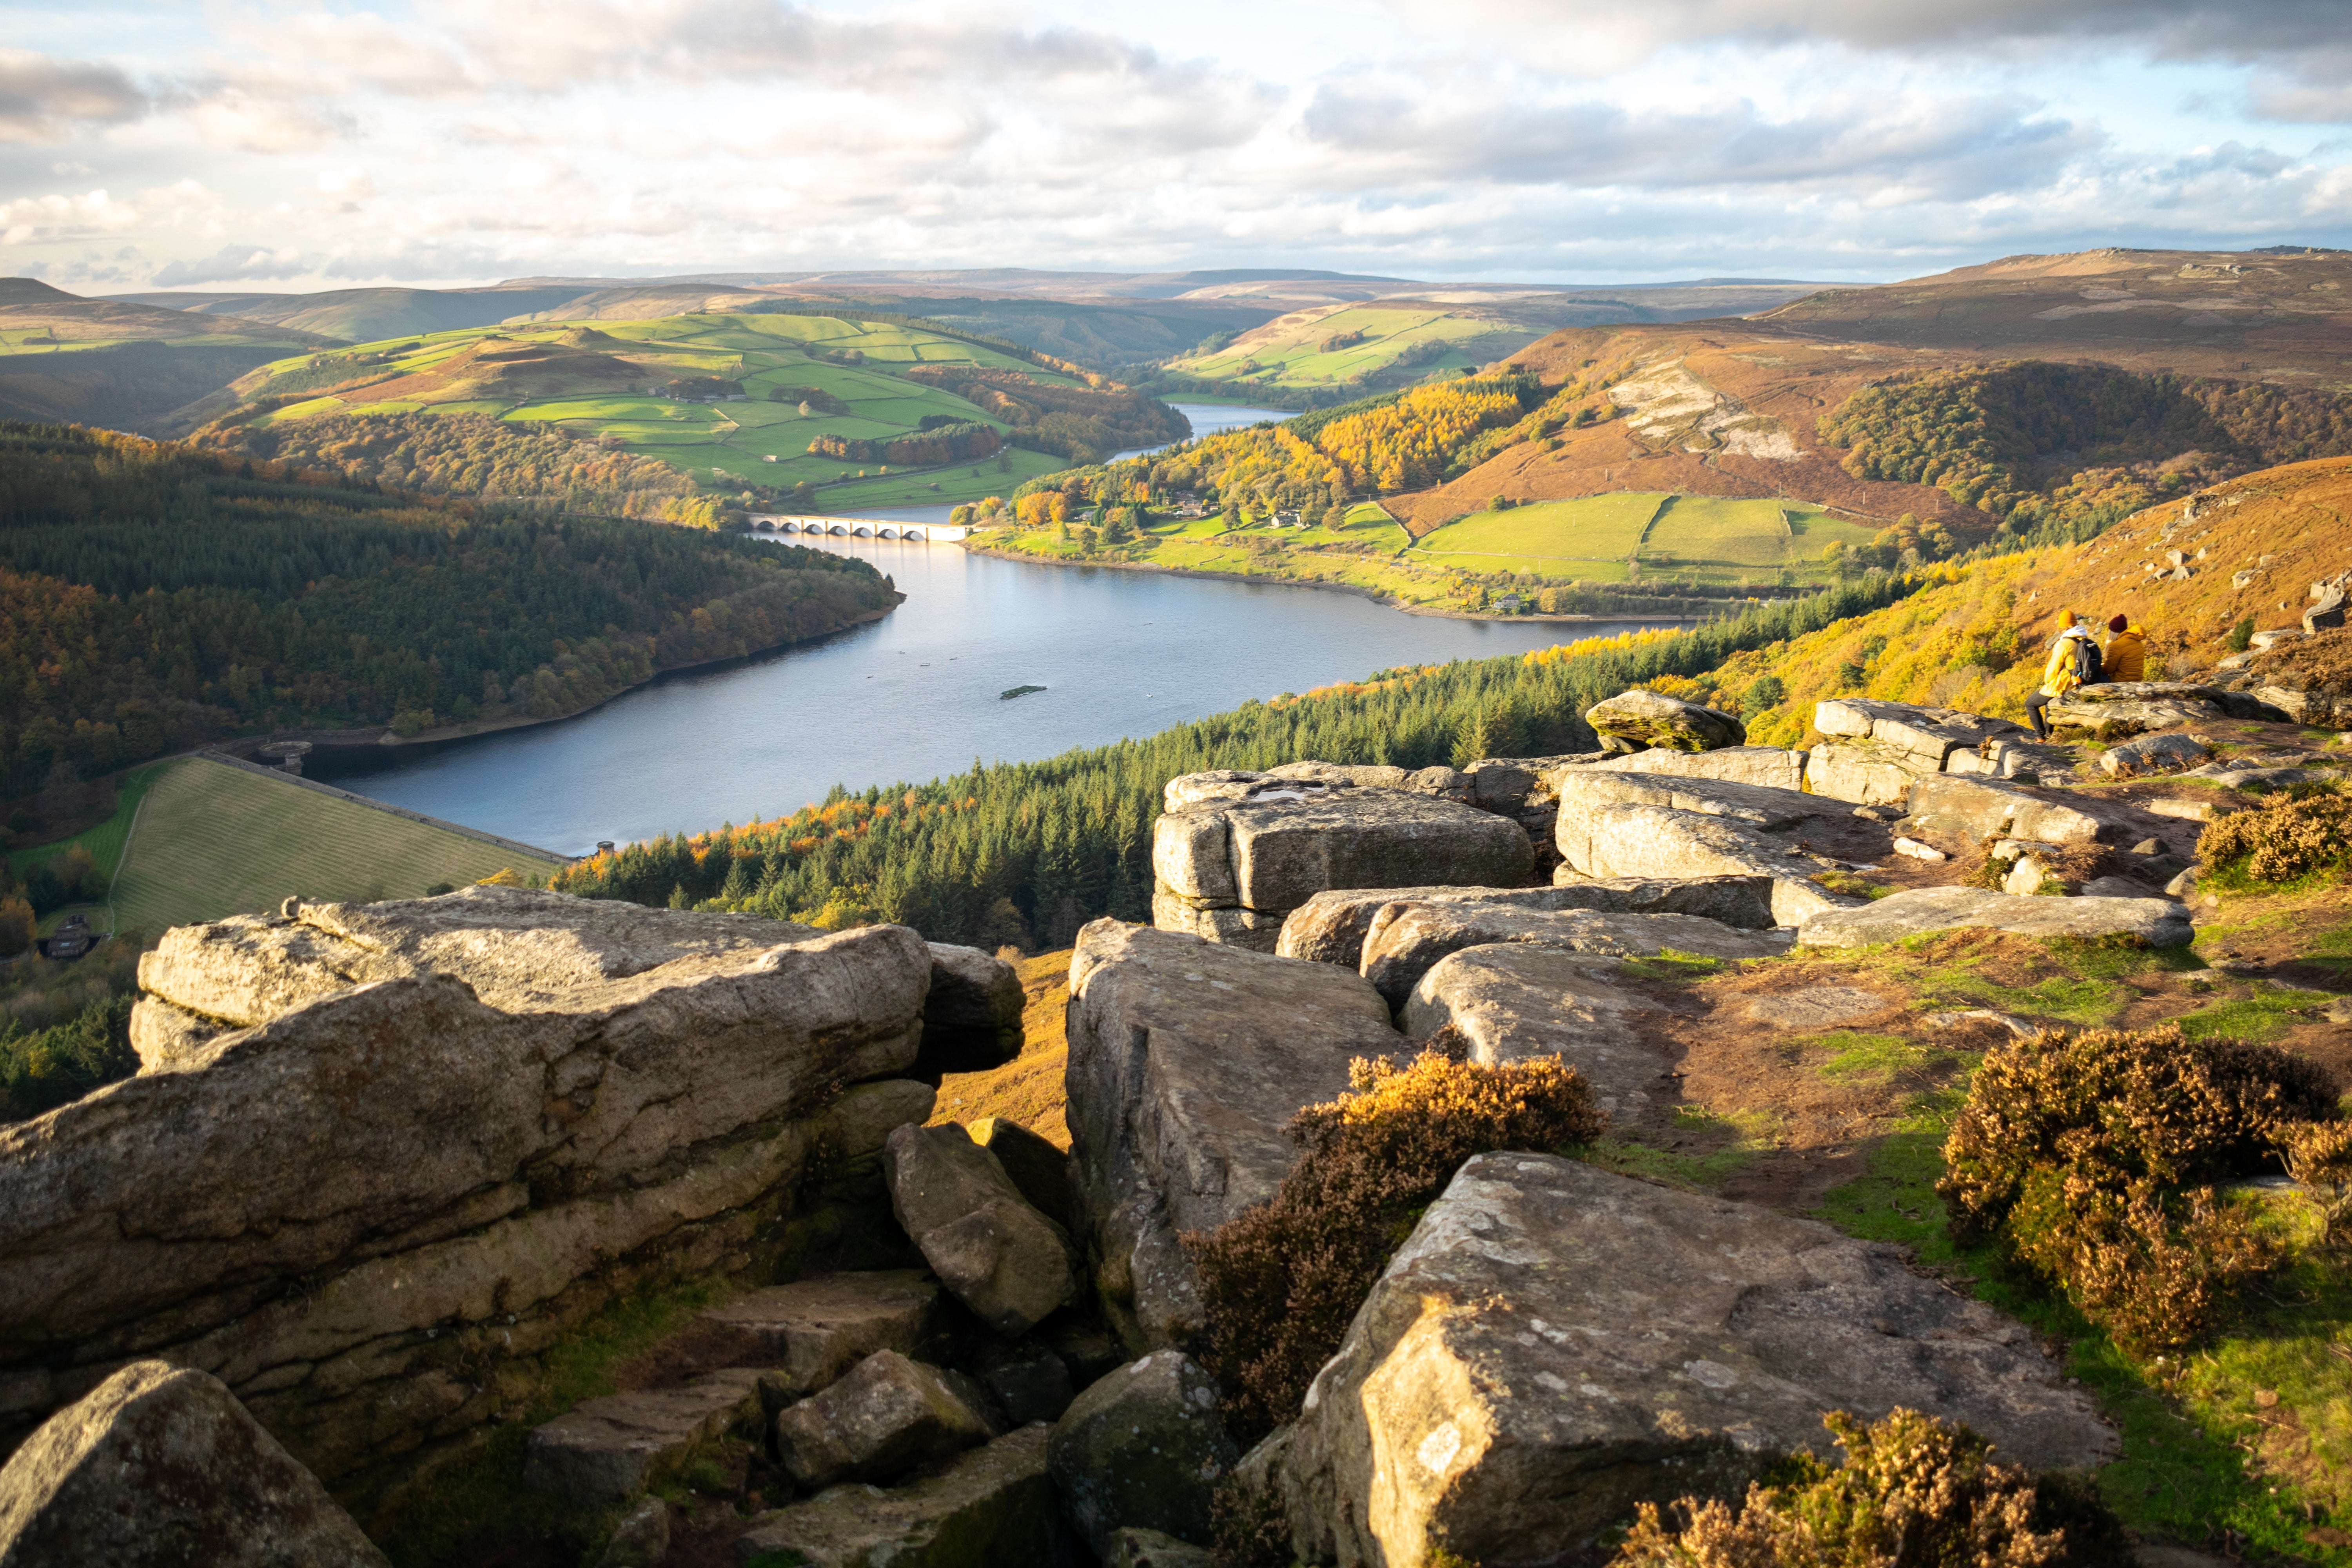 Explore all that the Peak District has to offer